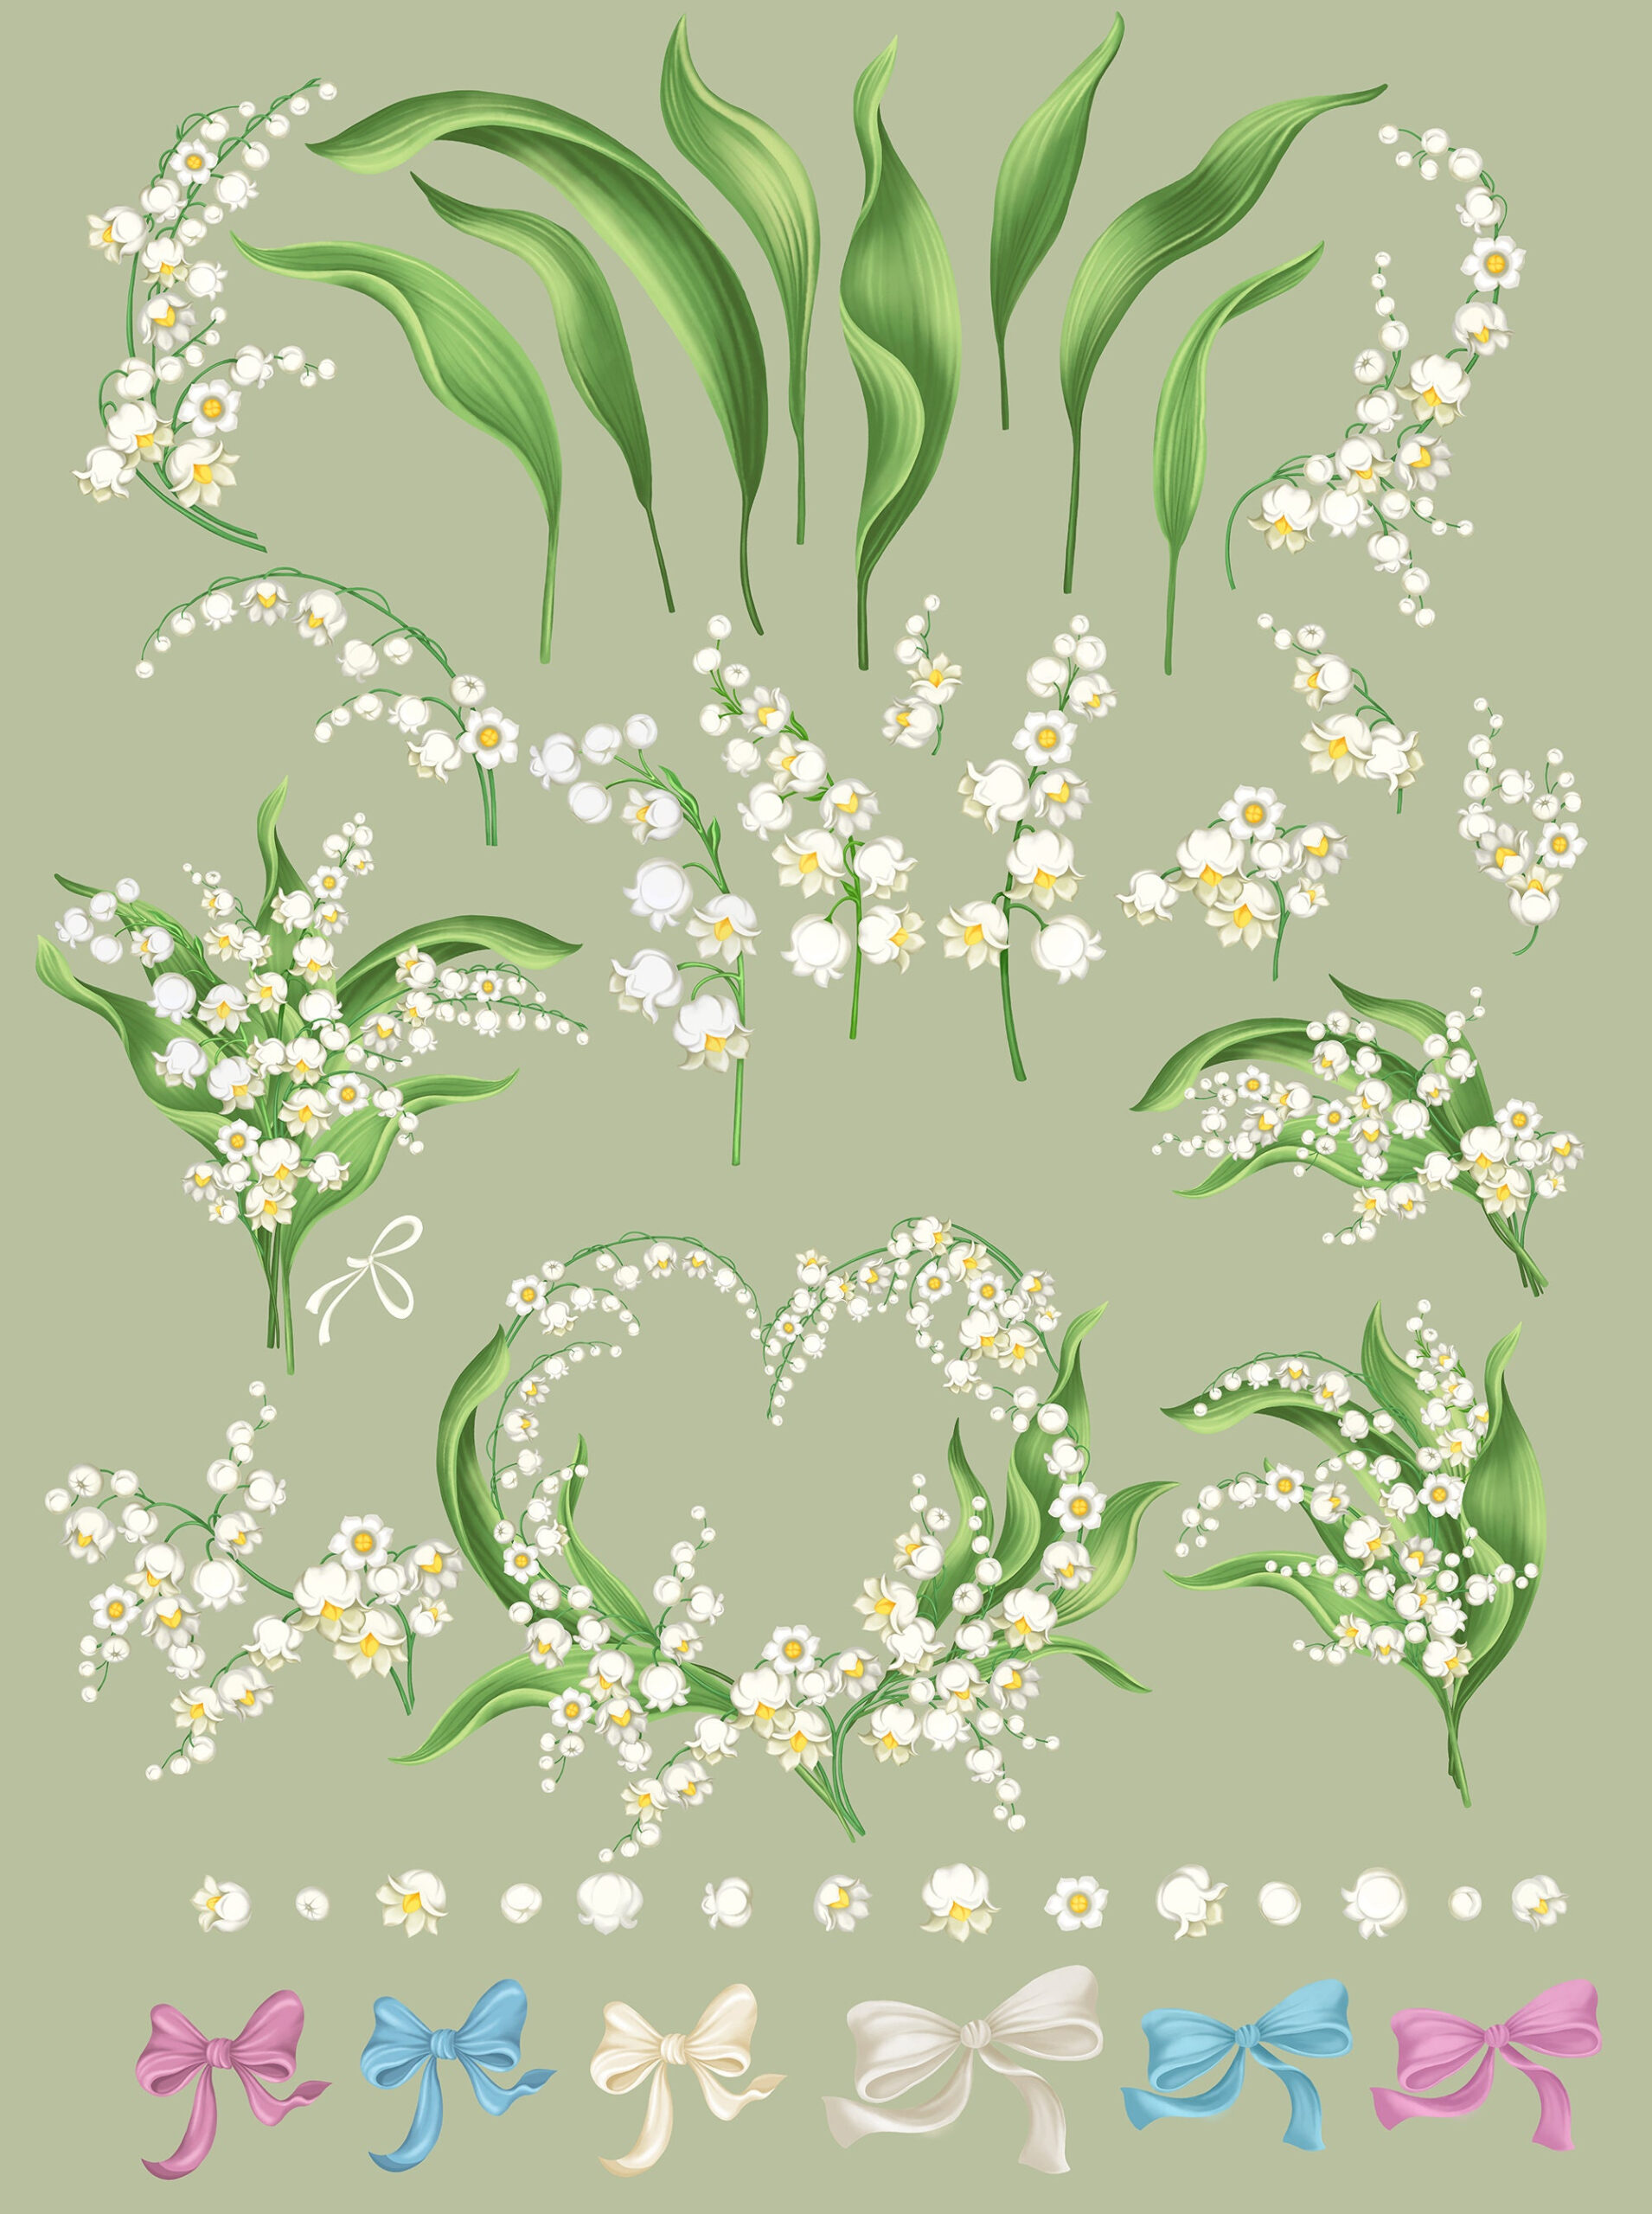 Lily Of The Valley Clipart Lily Of The Valley Botanical Clip | Etsy throughout Lily Of The Valley Botanical Drawing